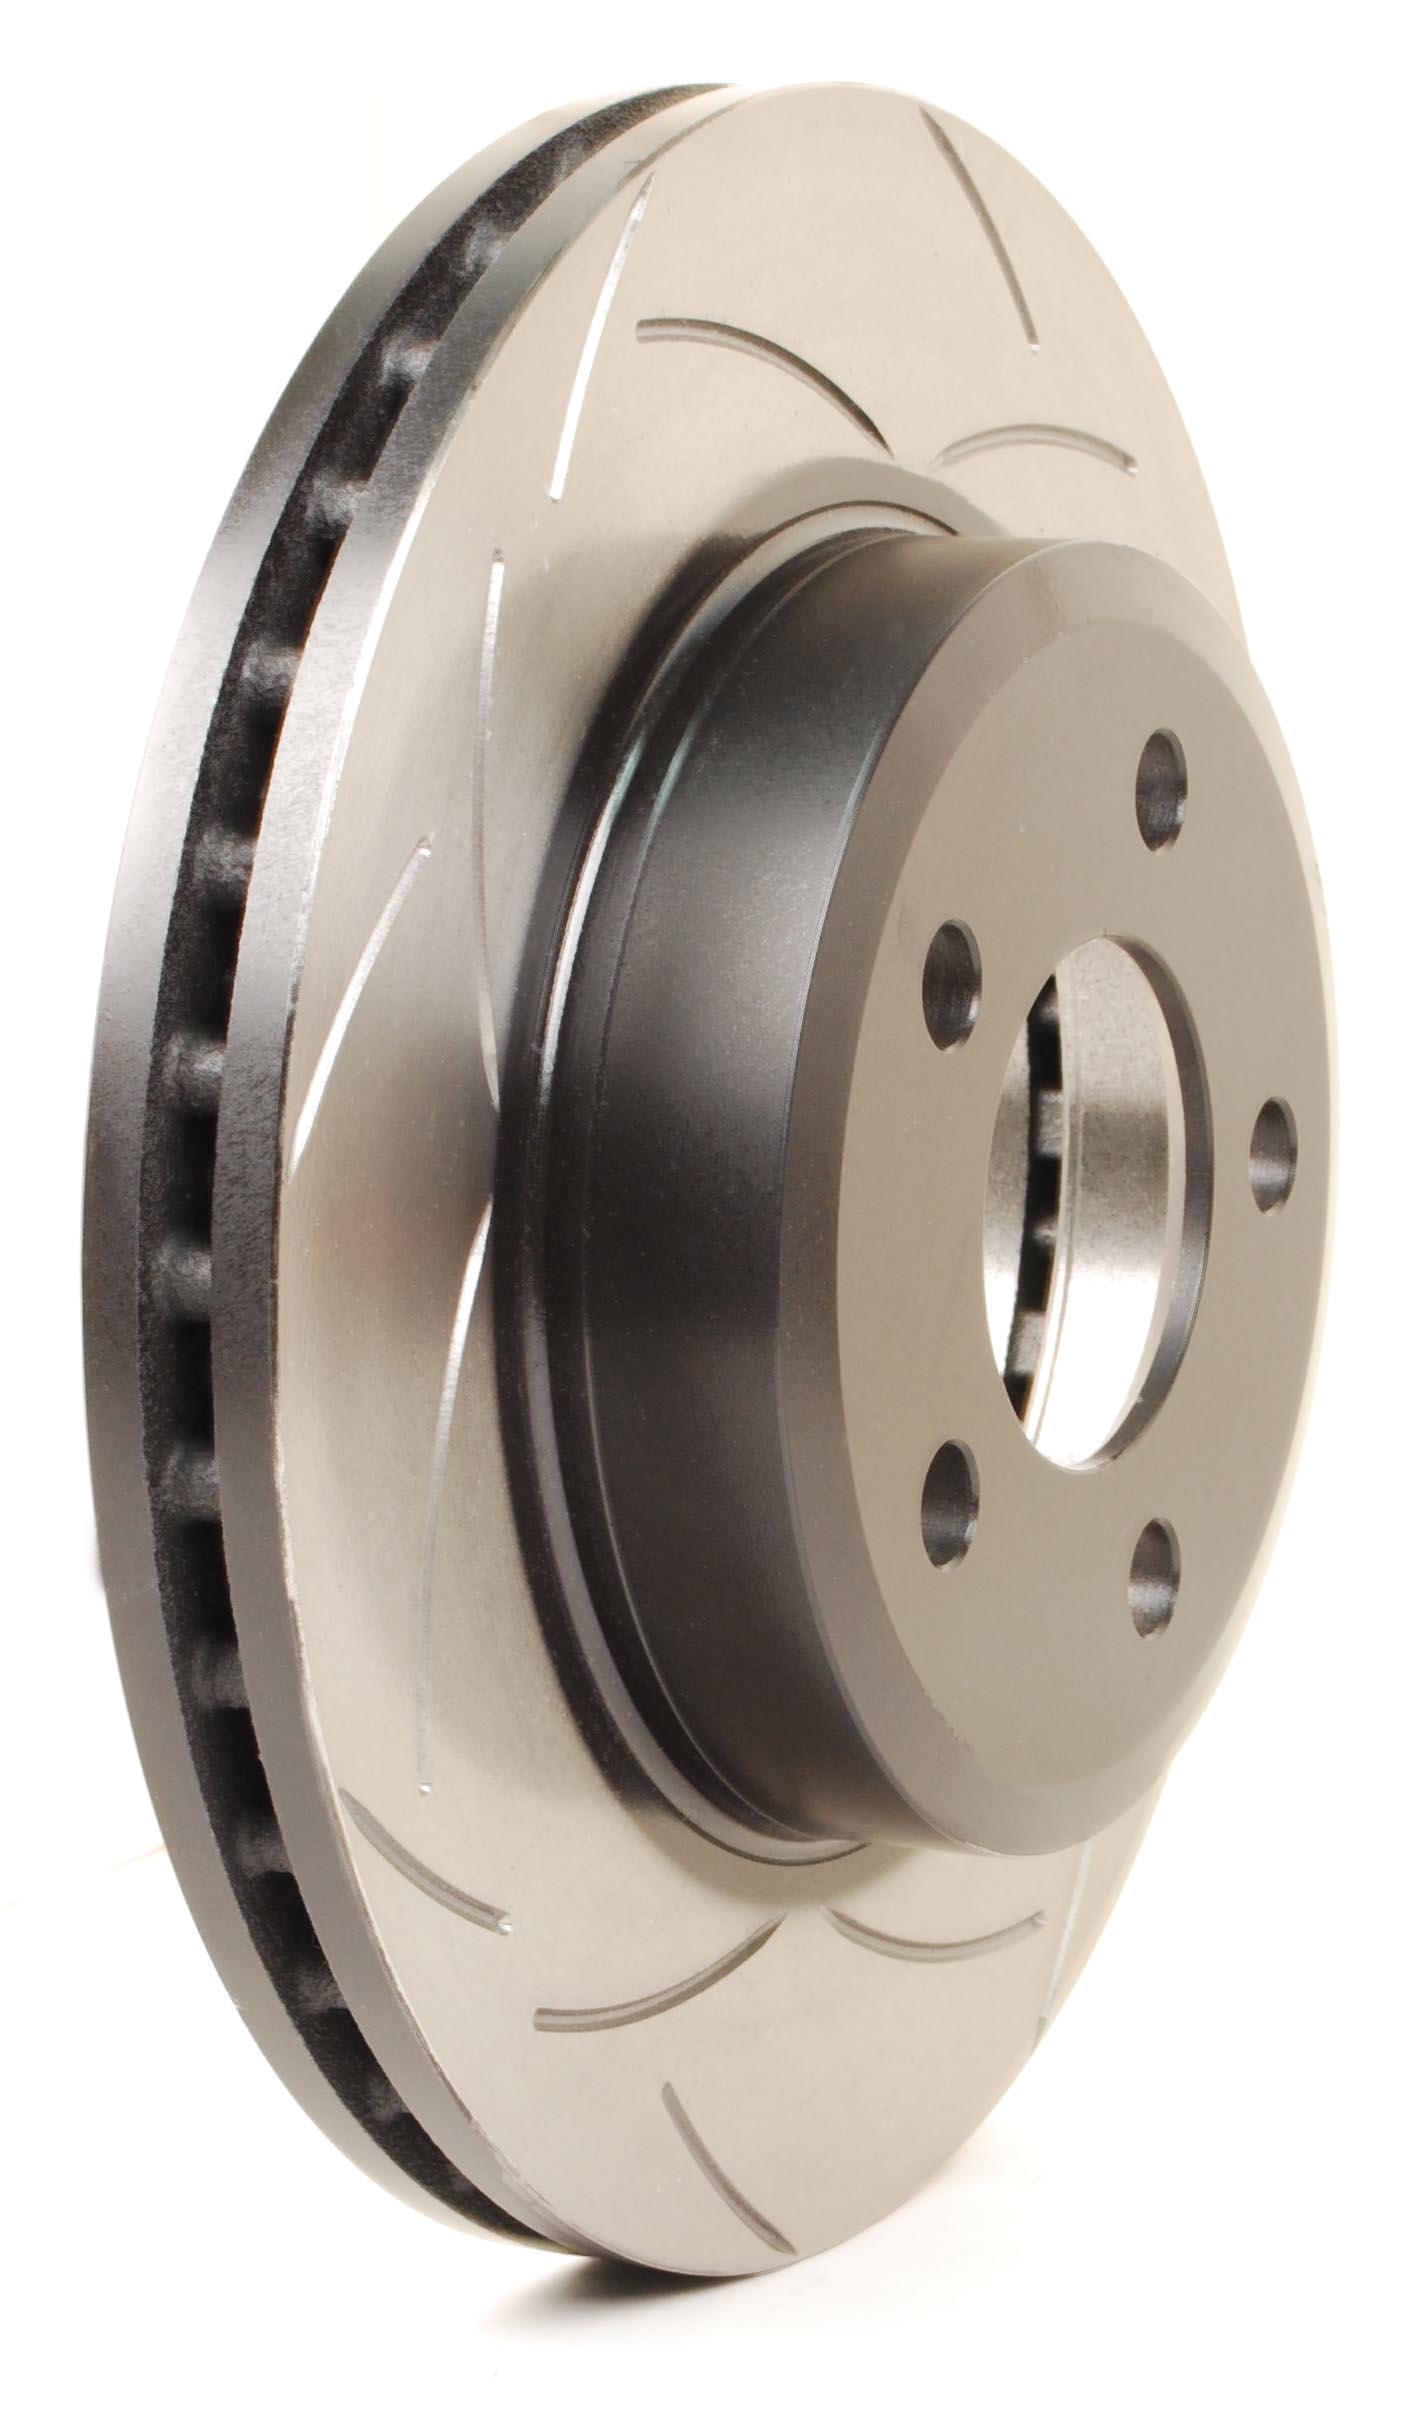 Dba, Disc Brake Rotor, T2 Street Series T-Slot Slotted Rotor, Front, Pn Dba788S, 4X4 Survival